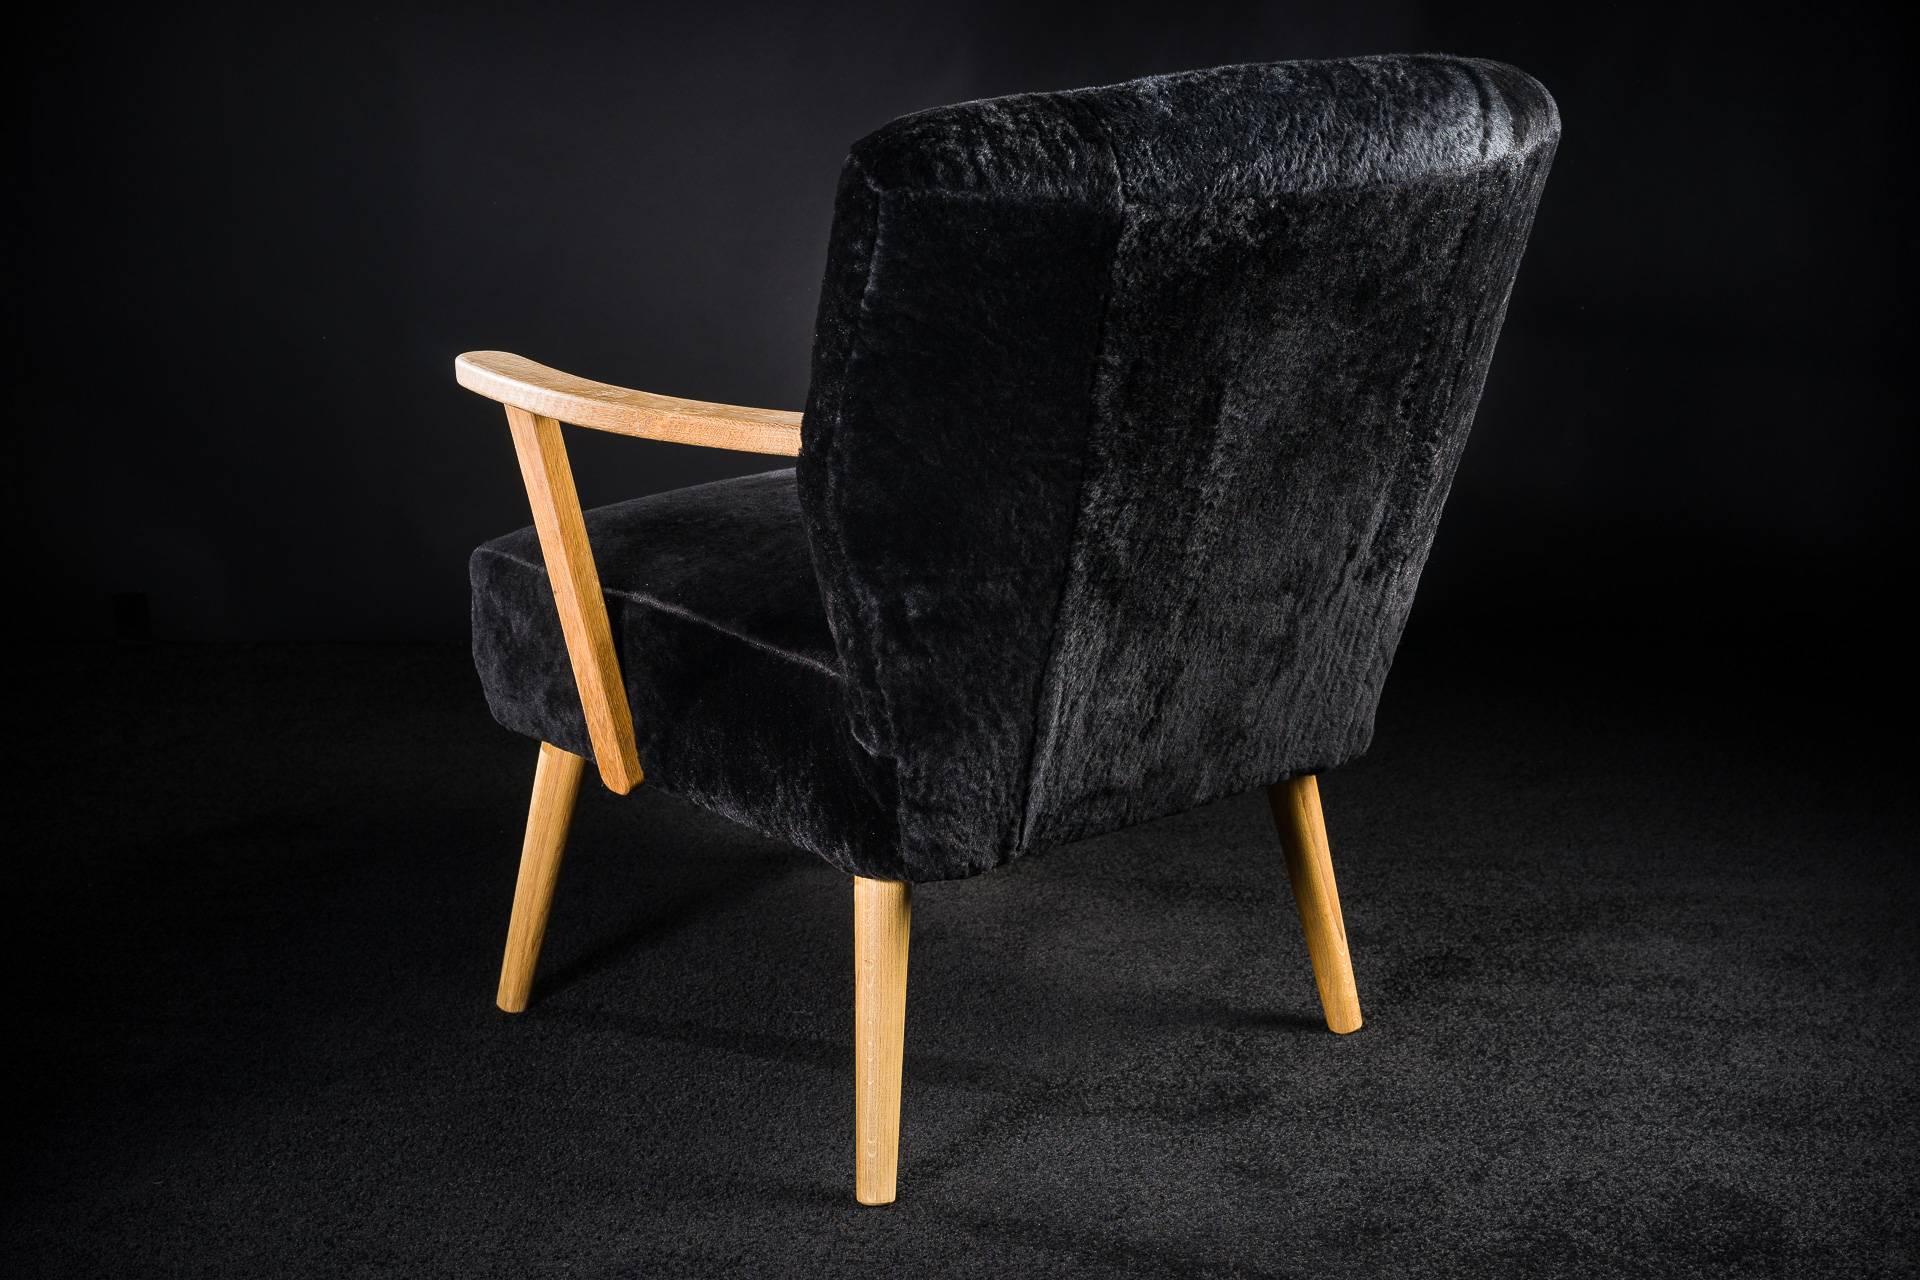 Luxurious and comfy Alpina armchair
Black shearling upholstery (available in natural white or cognac shearling)
Solid oak frame - natural color, dyed in black or old oak available
Hand-made in France by Norki

